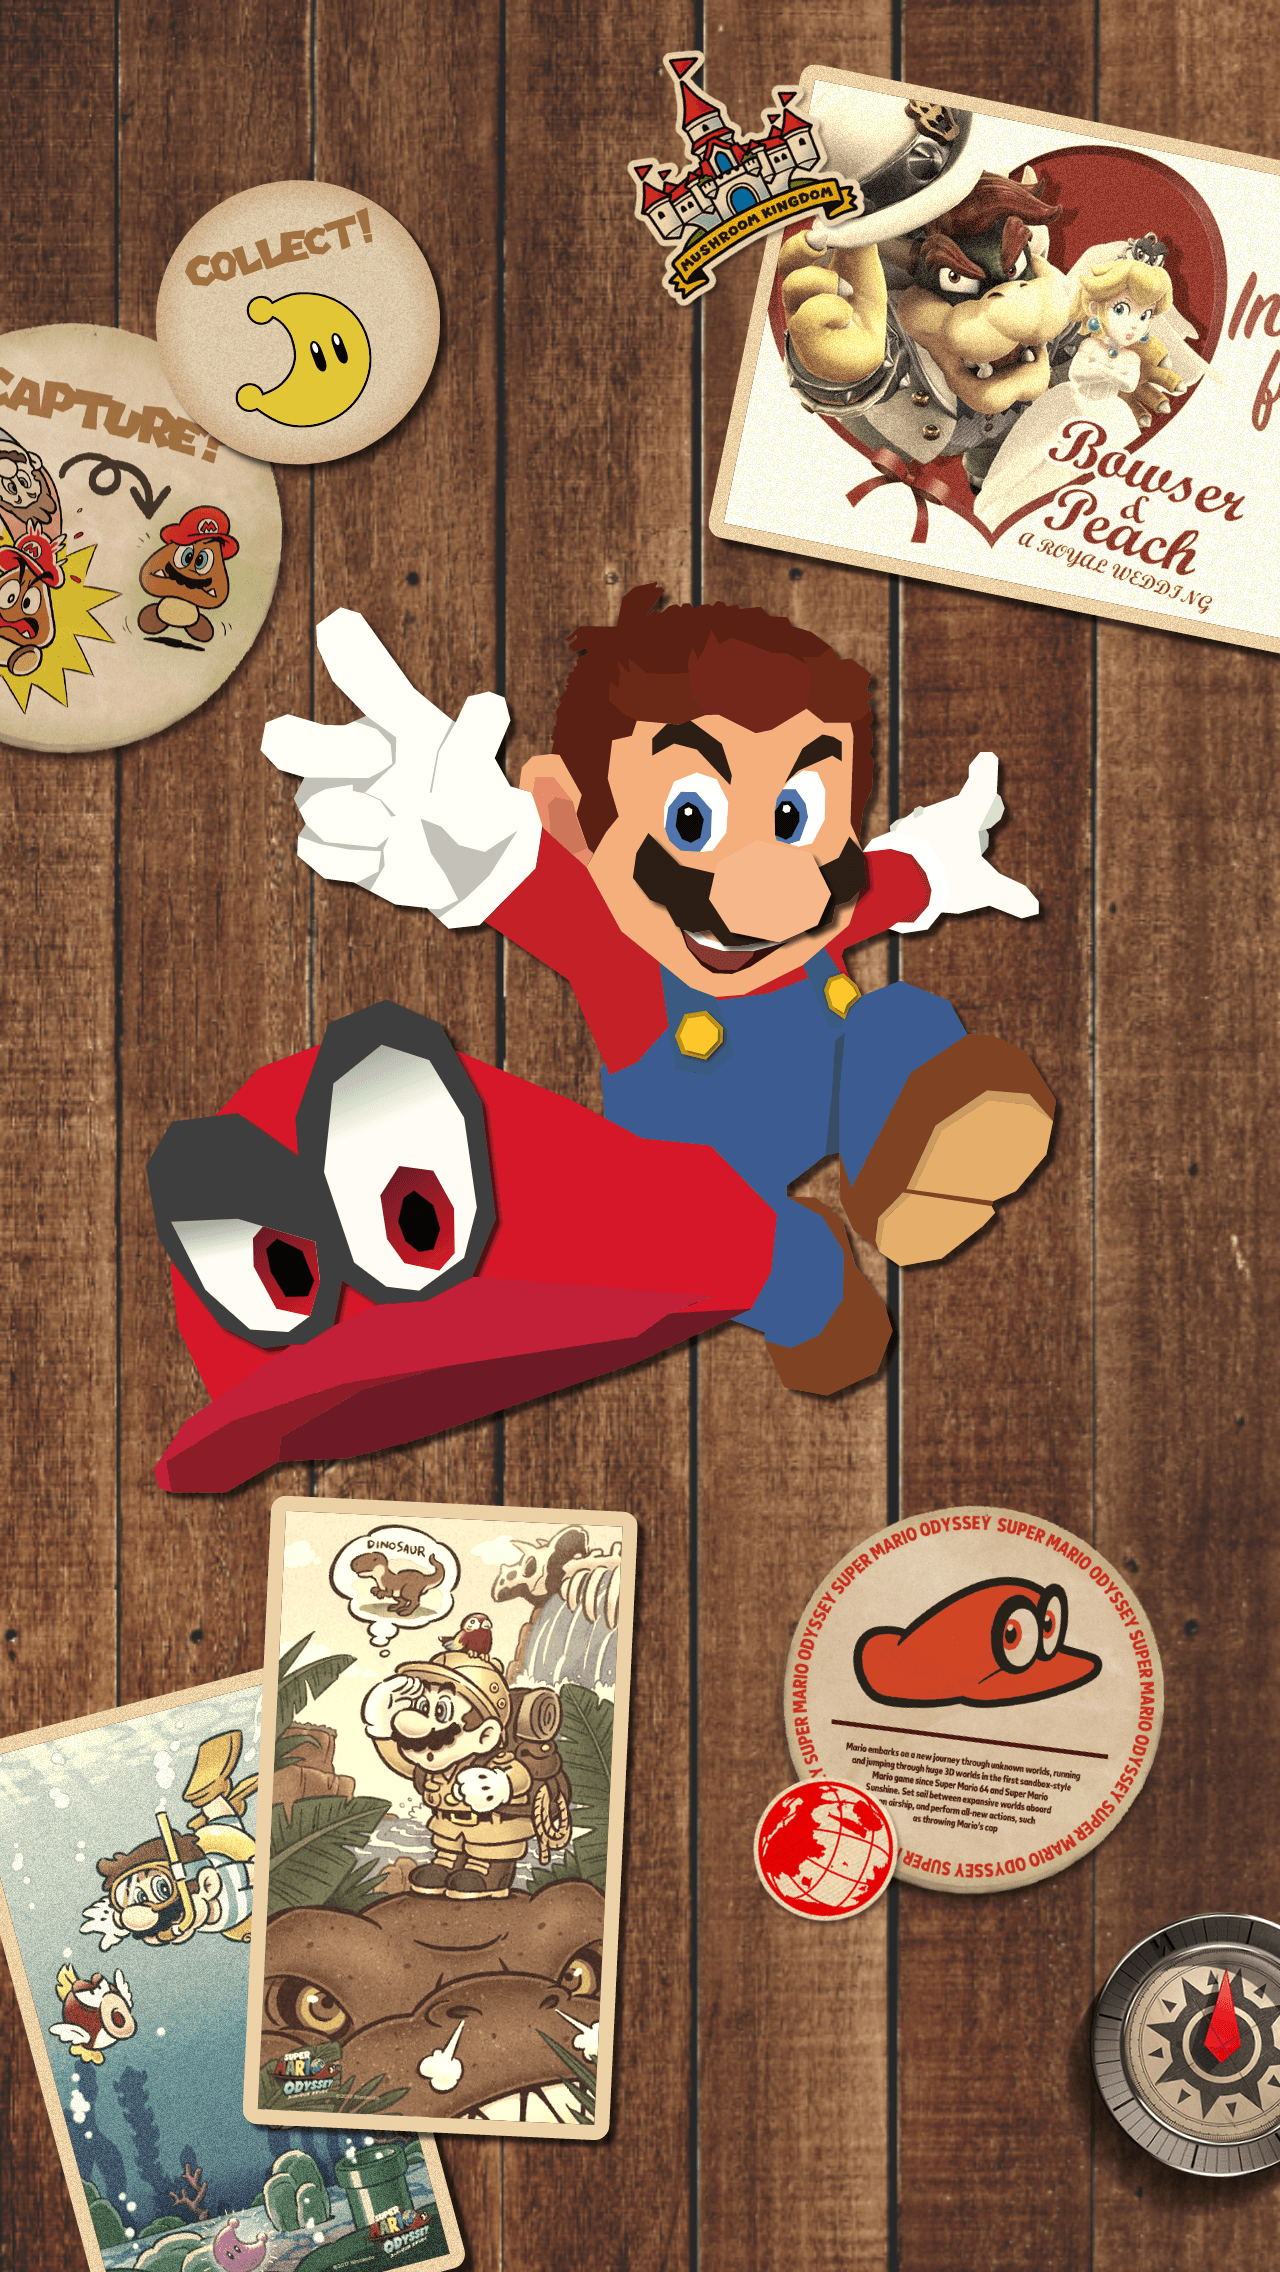 I made a Super Mario Odyssey wallpapers with the style from the